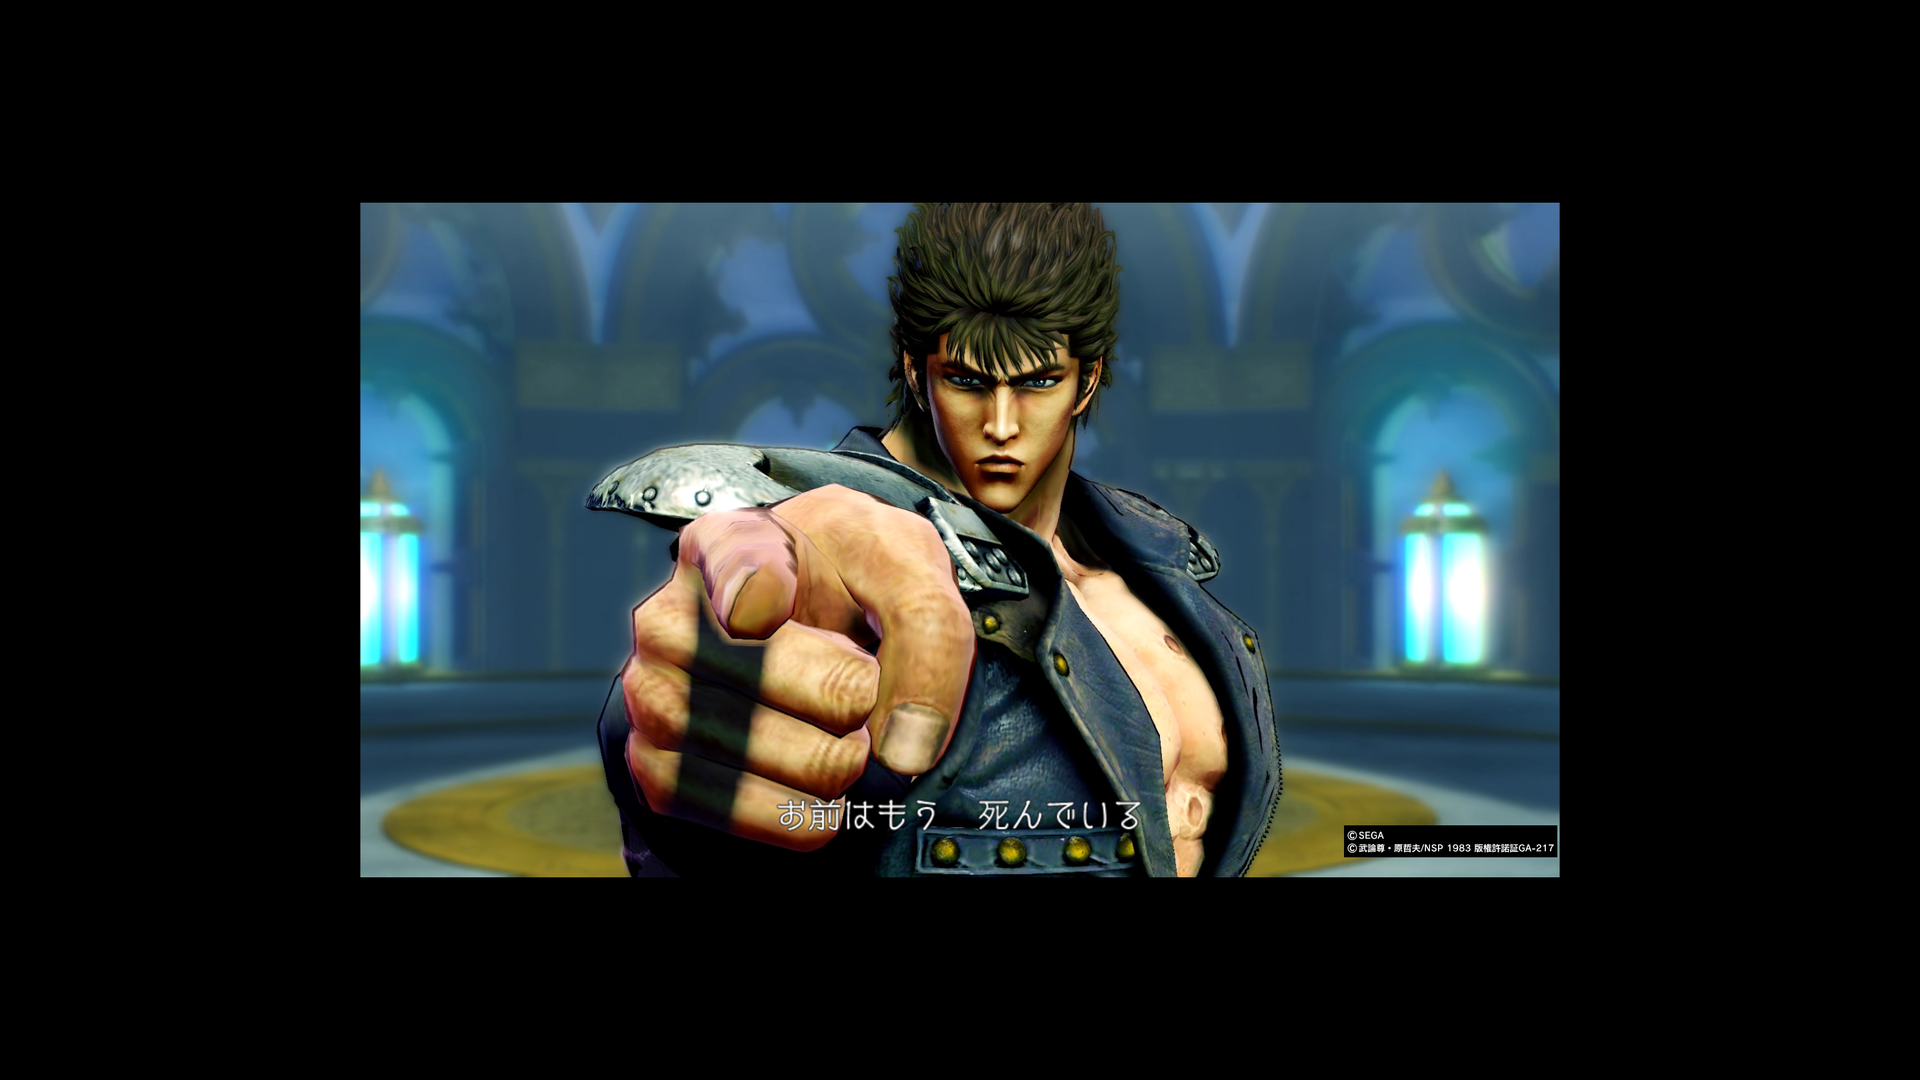 An Introduction To Fist of the North Star | TechRaptor